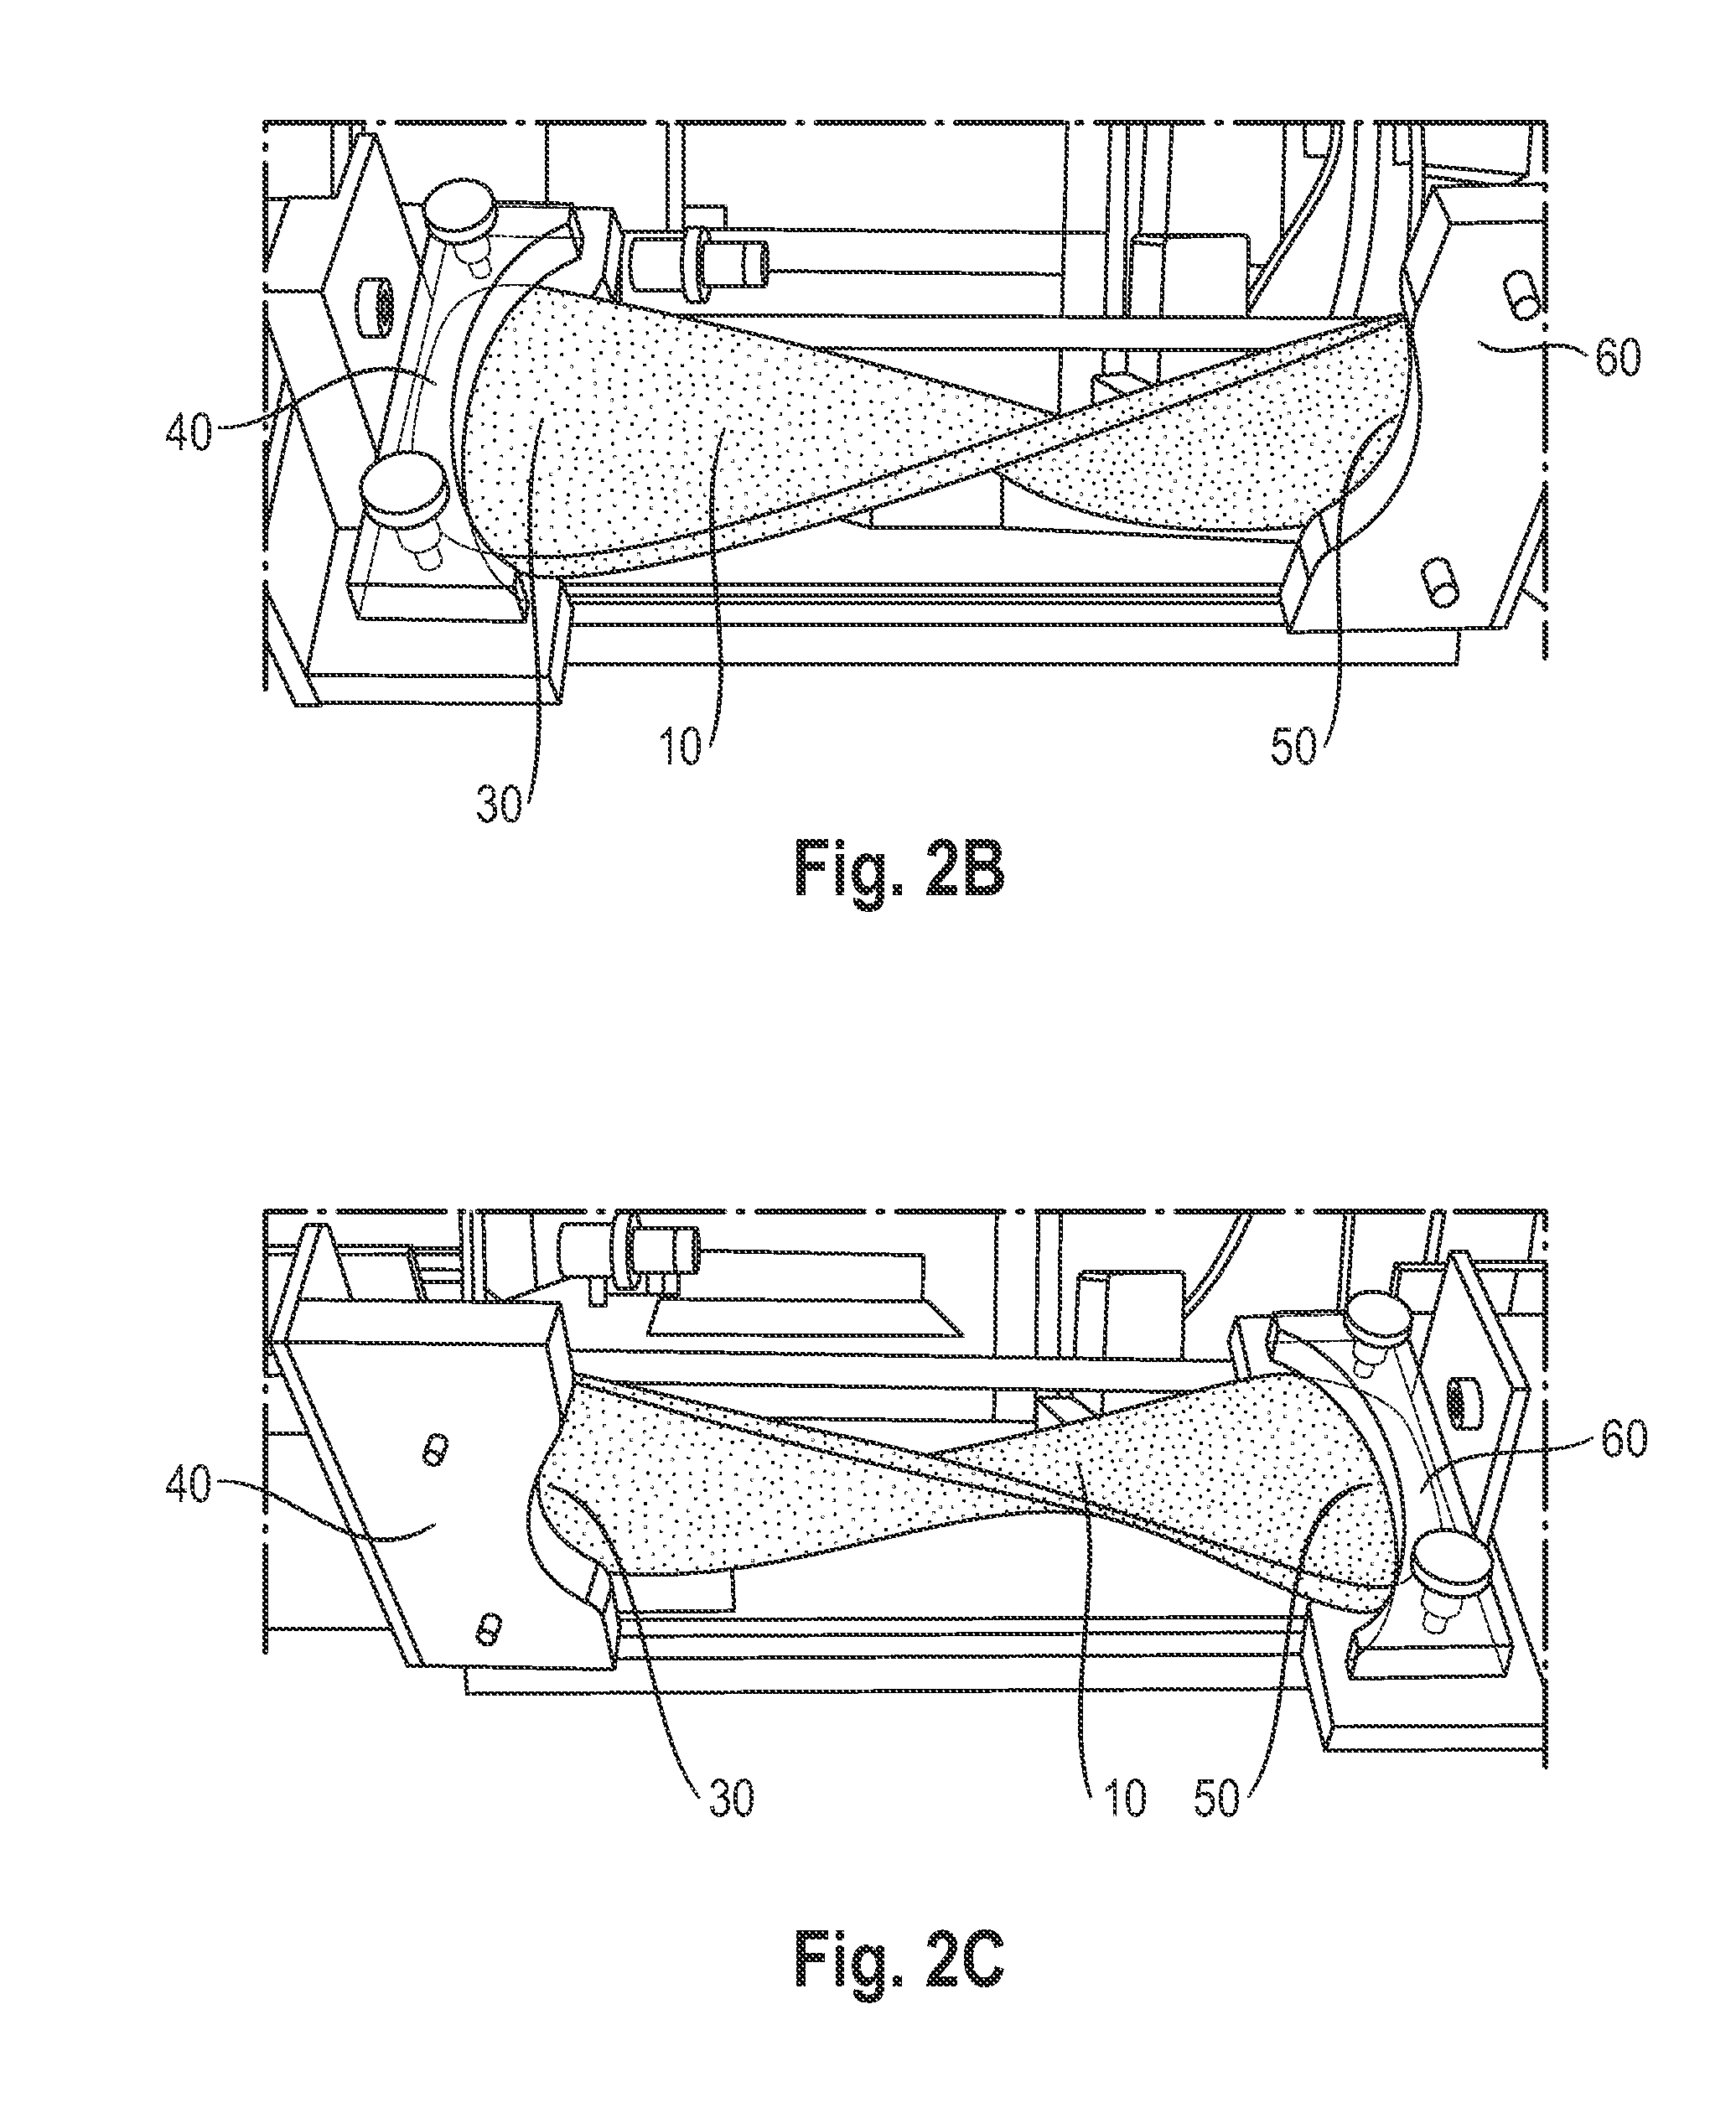 Method for Evaluating Absorbency of an Absorbent Article